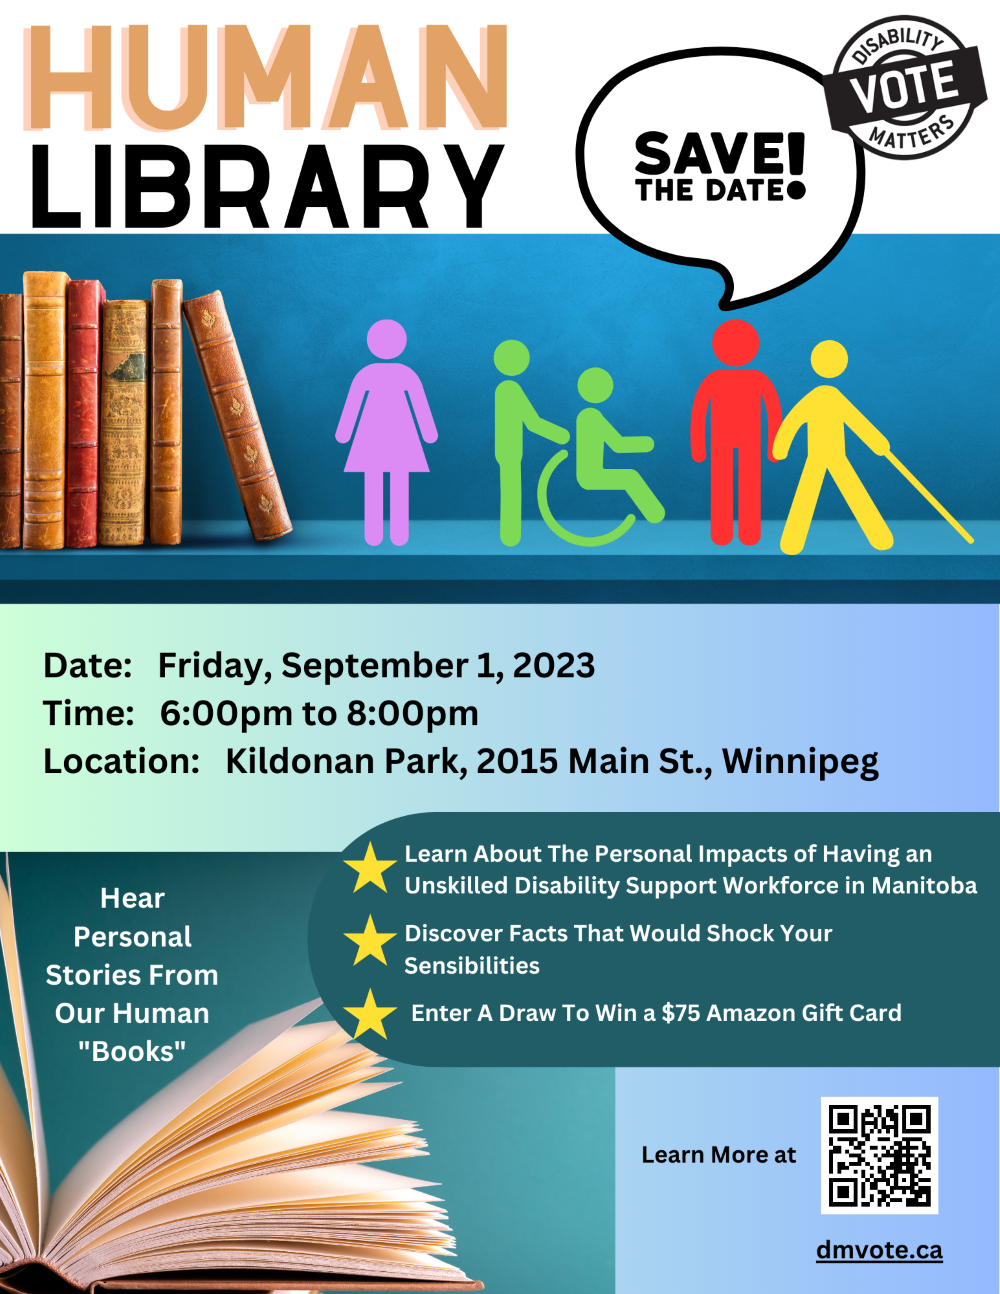 2023_Human-Library-Event_Poster_1.png (1.26 MB)